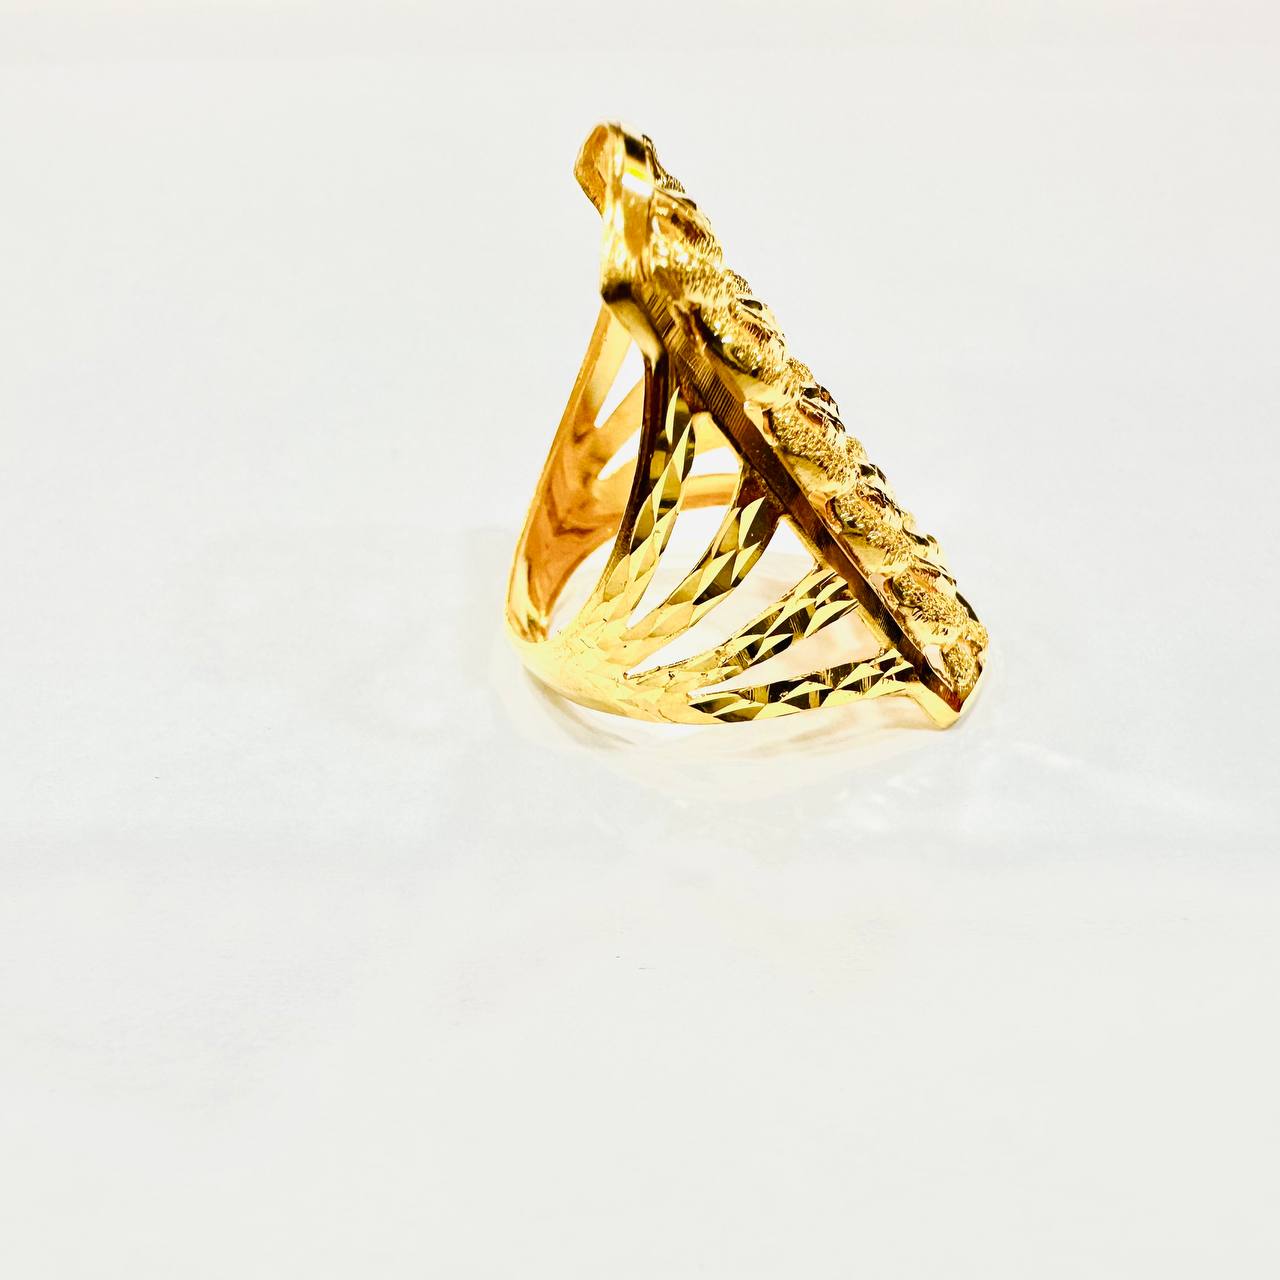 22k / 916 Gold Wide Coco Ring-916 gold-Best Gold Shop